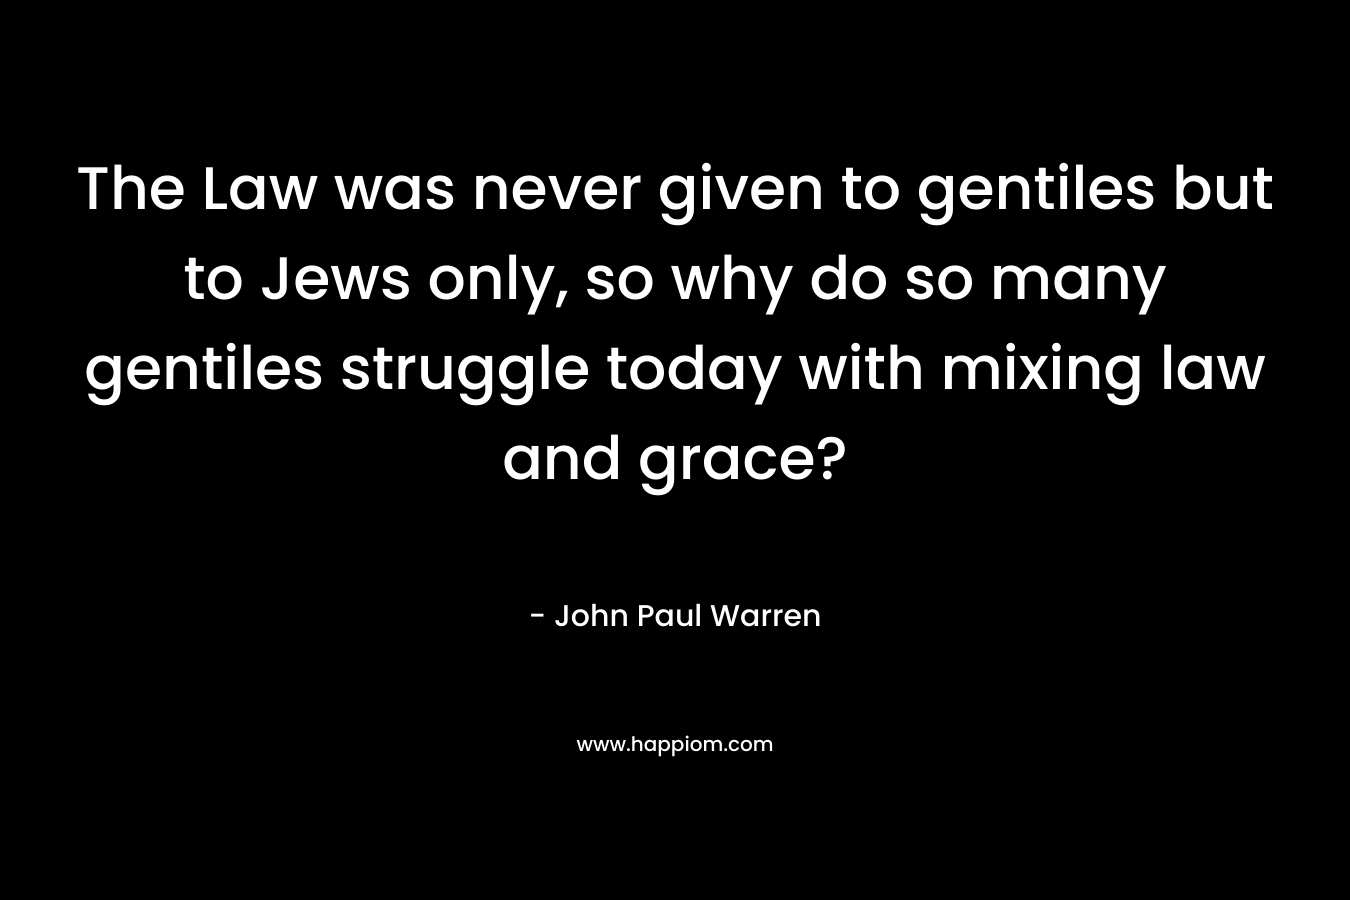 The Law was never given to gentiles but to Jews only, so why do so many gentiles struggle today with mixing law and grace?